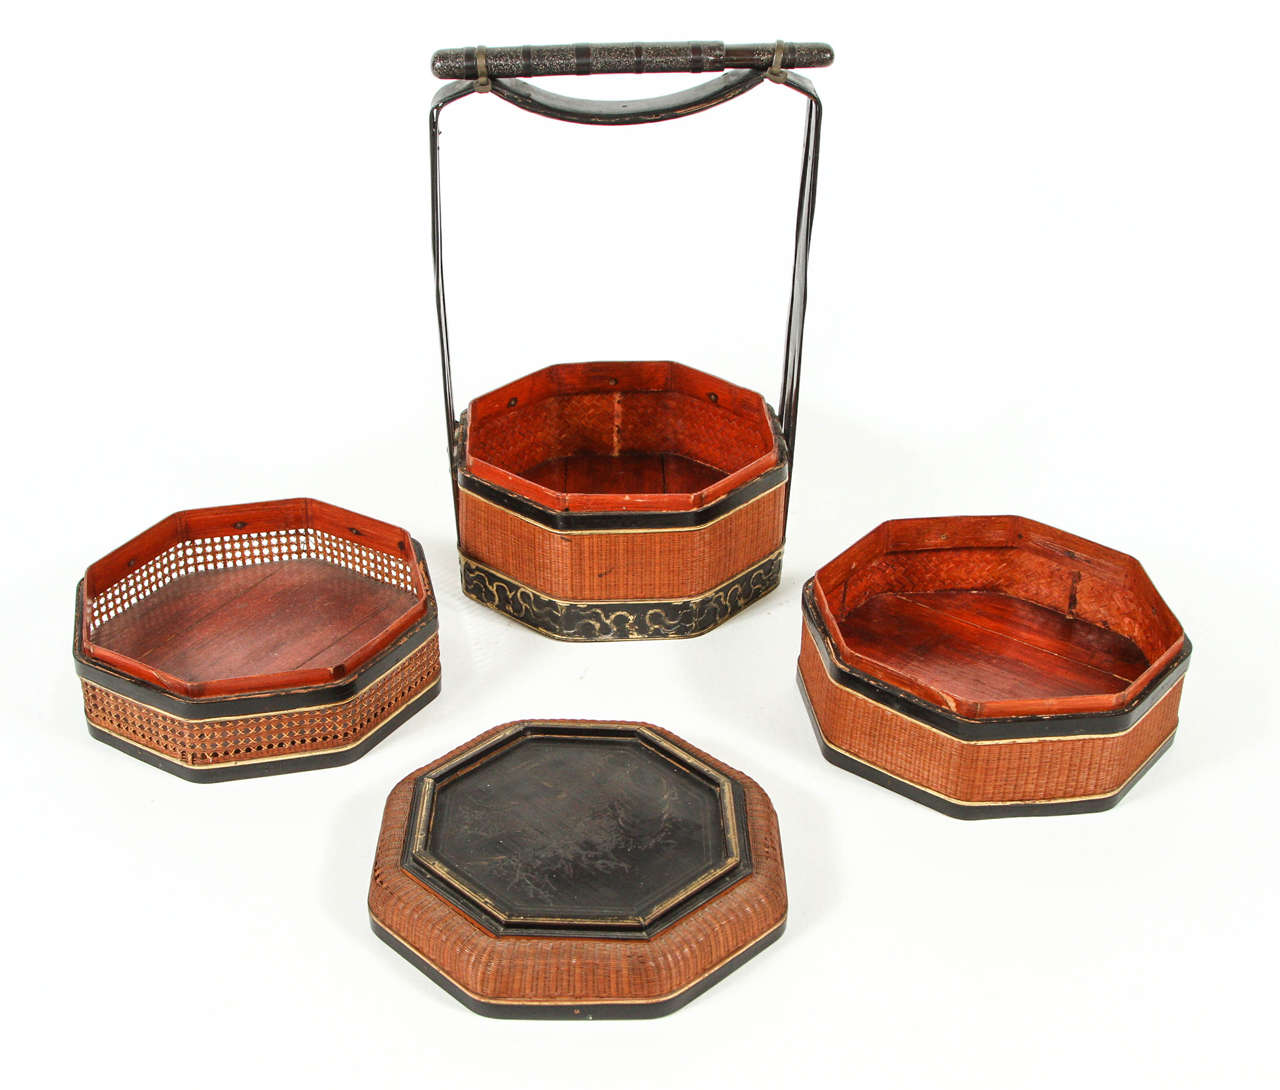 19th Century Chinese Lacquer and Woven Rattan Stacking Basket, circa 1880